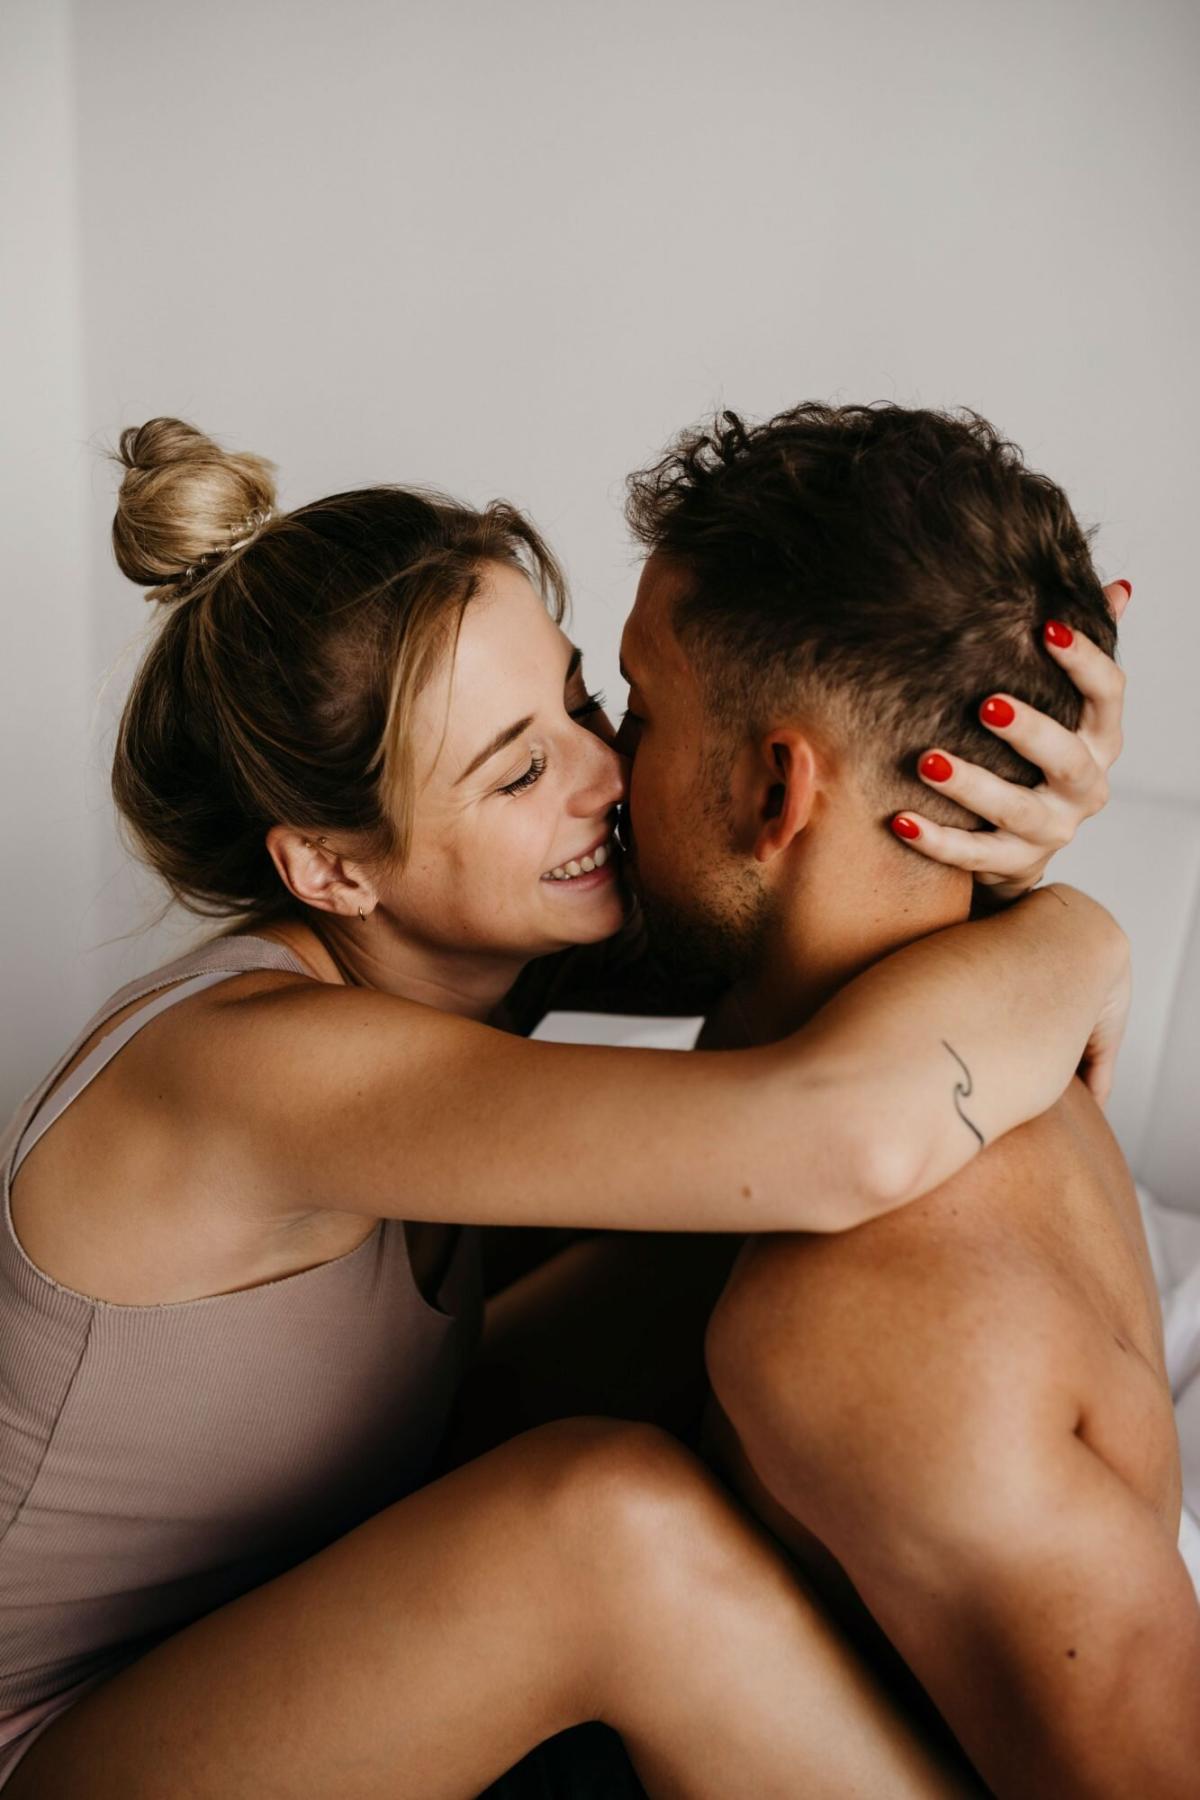 How to Spice Up Your Sex Life, According to Experts